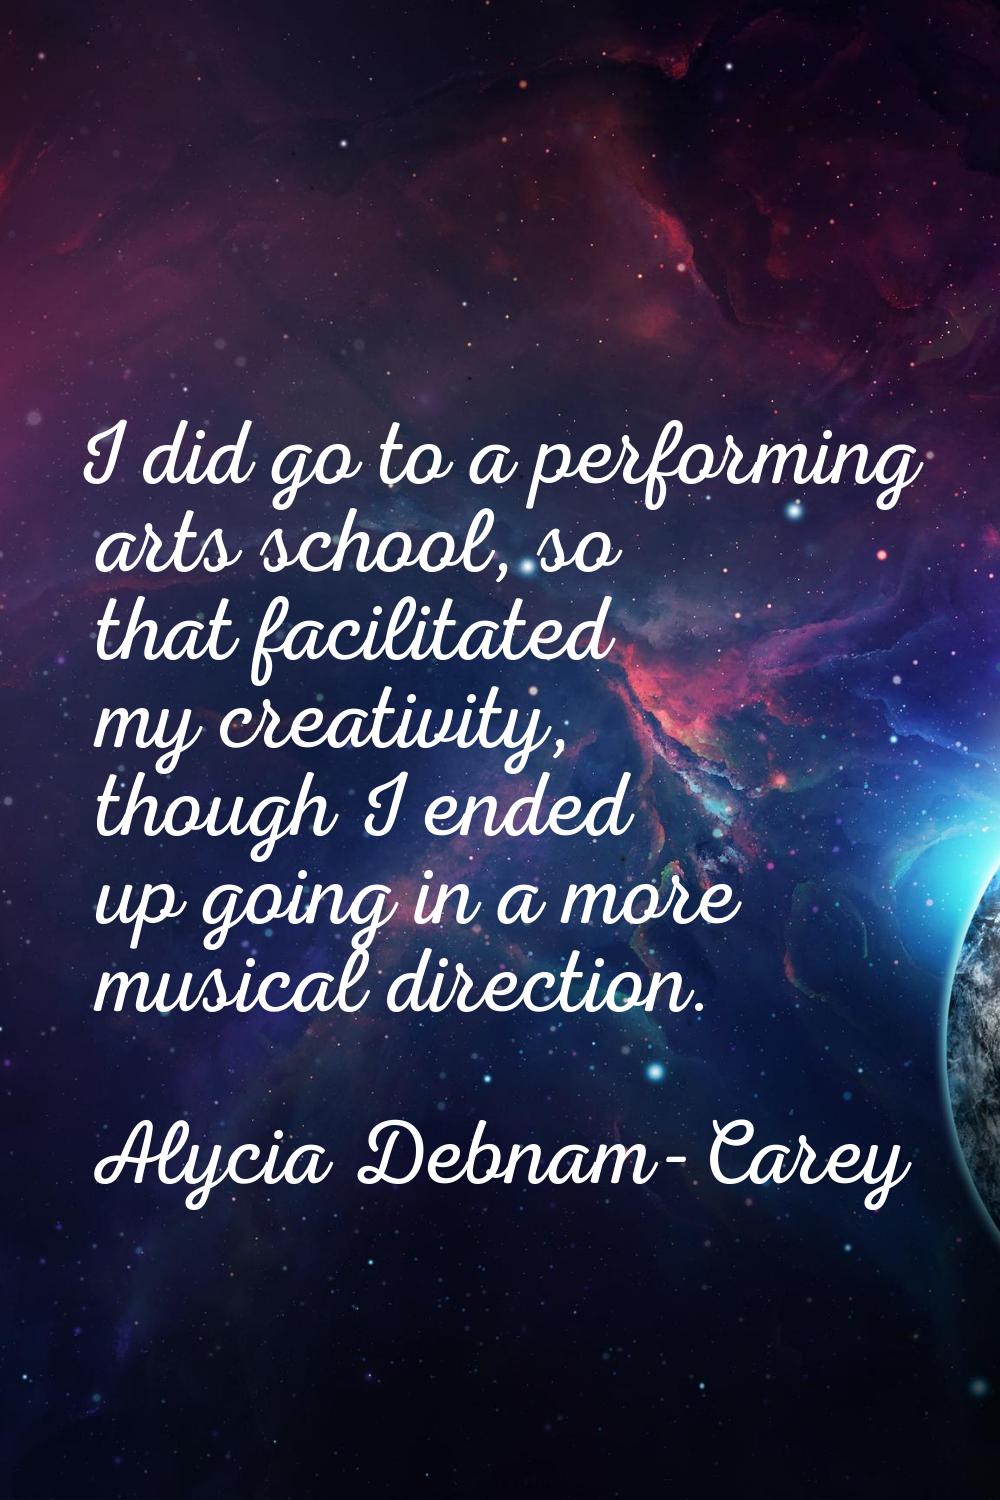 I did go to a performing arts school, so that facilitated my creativity, though I ended up going in